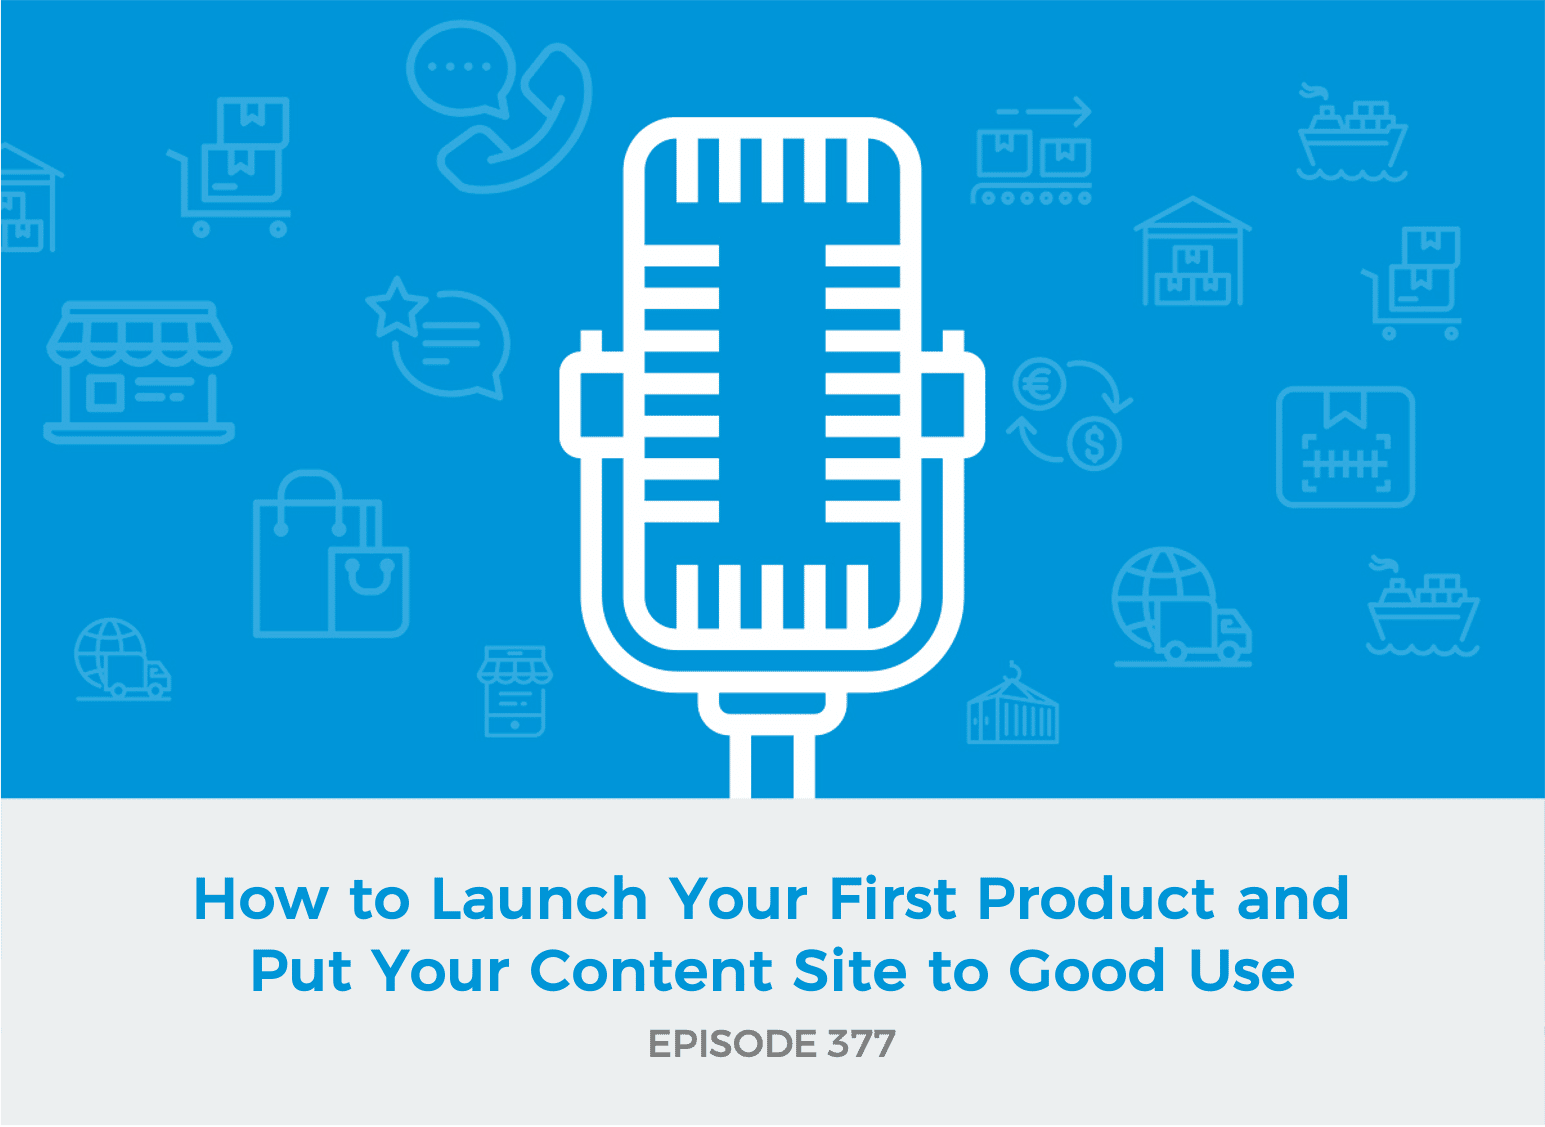 E377 - How to Launch Your First Product and Put Your Content Site to Good Use